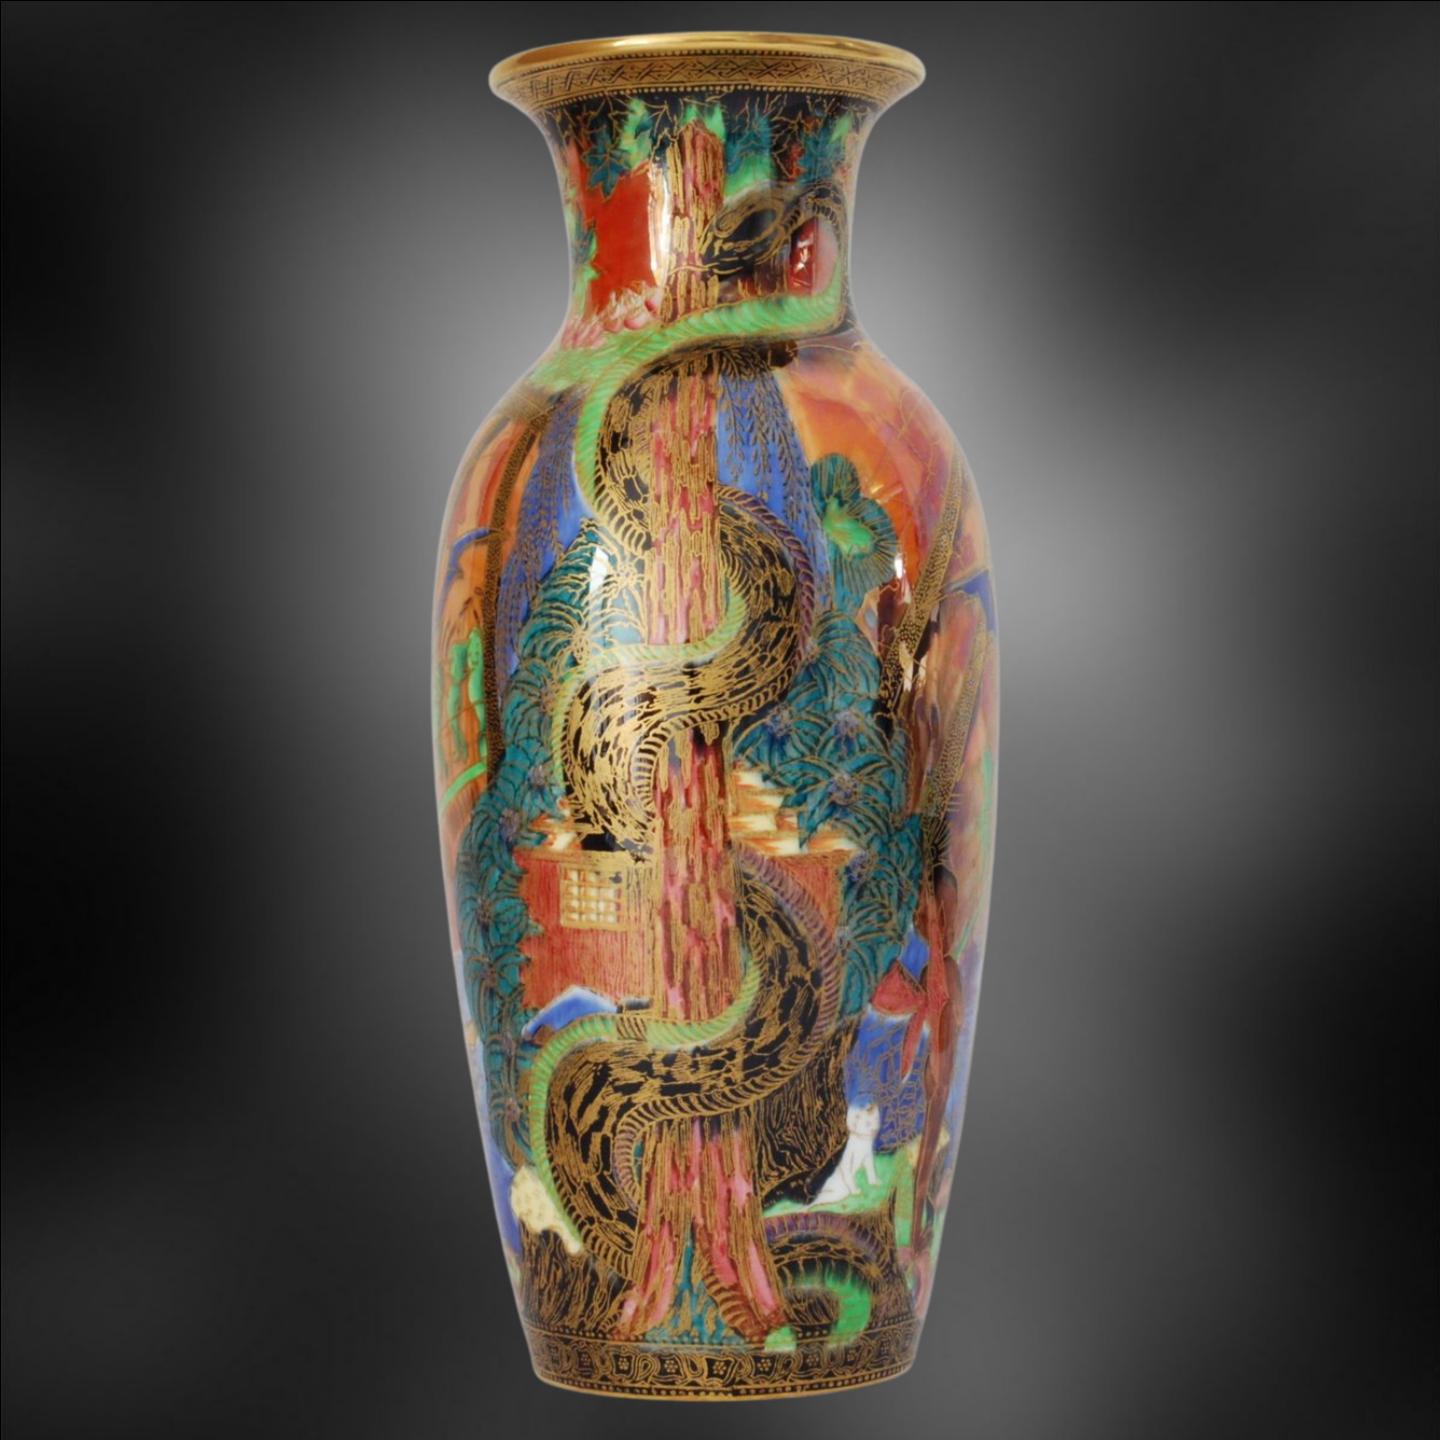 A tall, well-proportioned vase in Flame Fairyland Lustre, decorated with Tree Serpent pattern and Imps on a Bridge (pattern Z5360).

Exhibited: Wedgwood, Master Potter to the Universe, Roche Foundation, 2023.

Wedgwood's Flame Fairyland Lustre is a